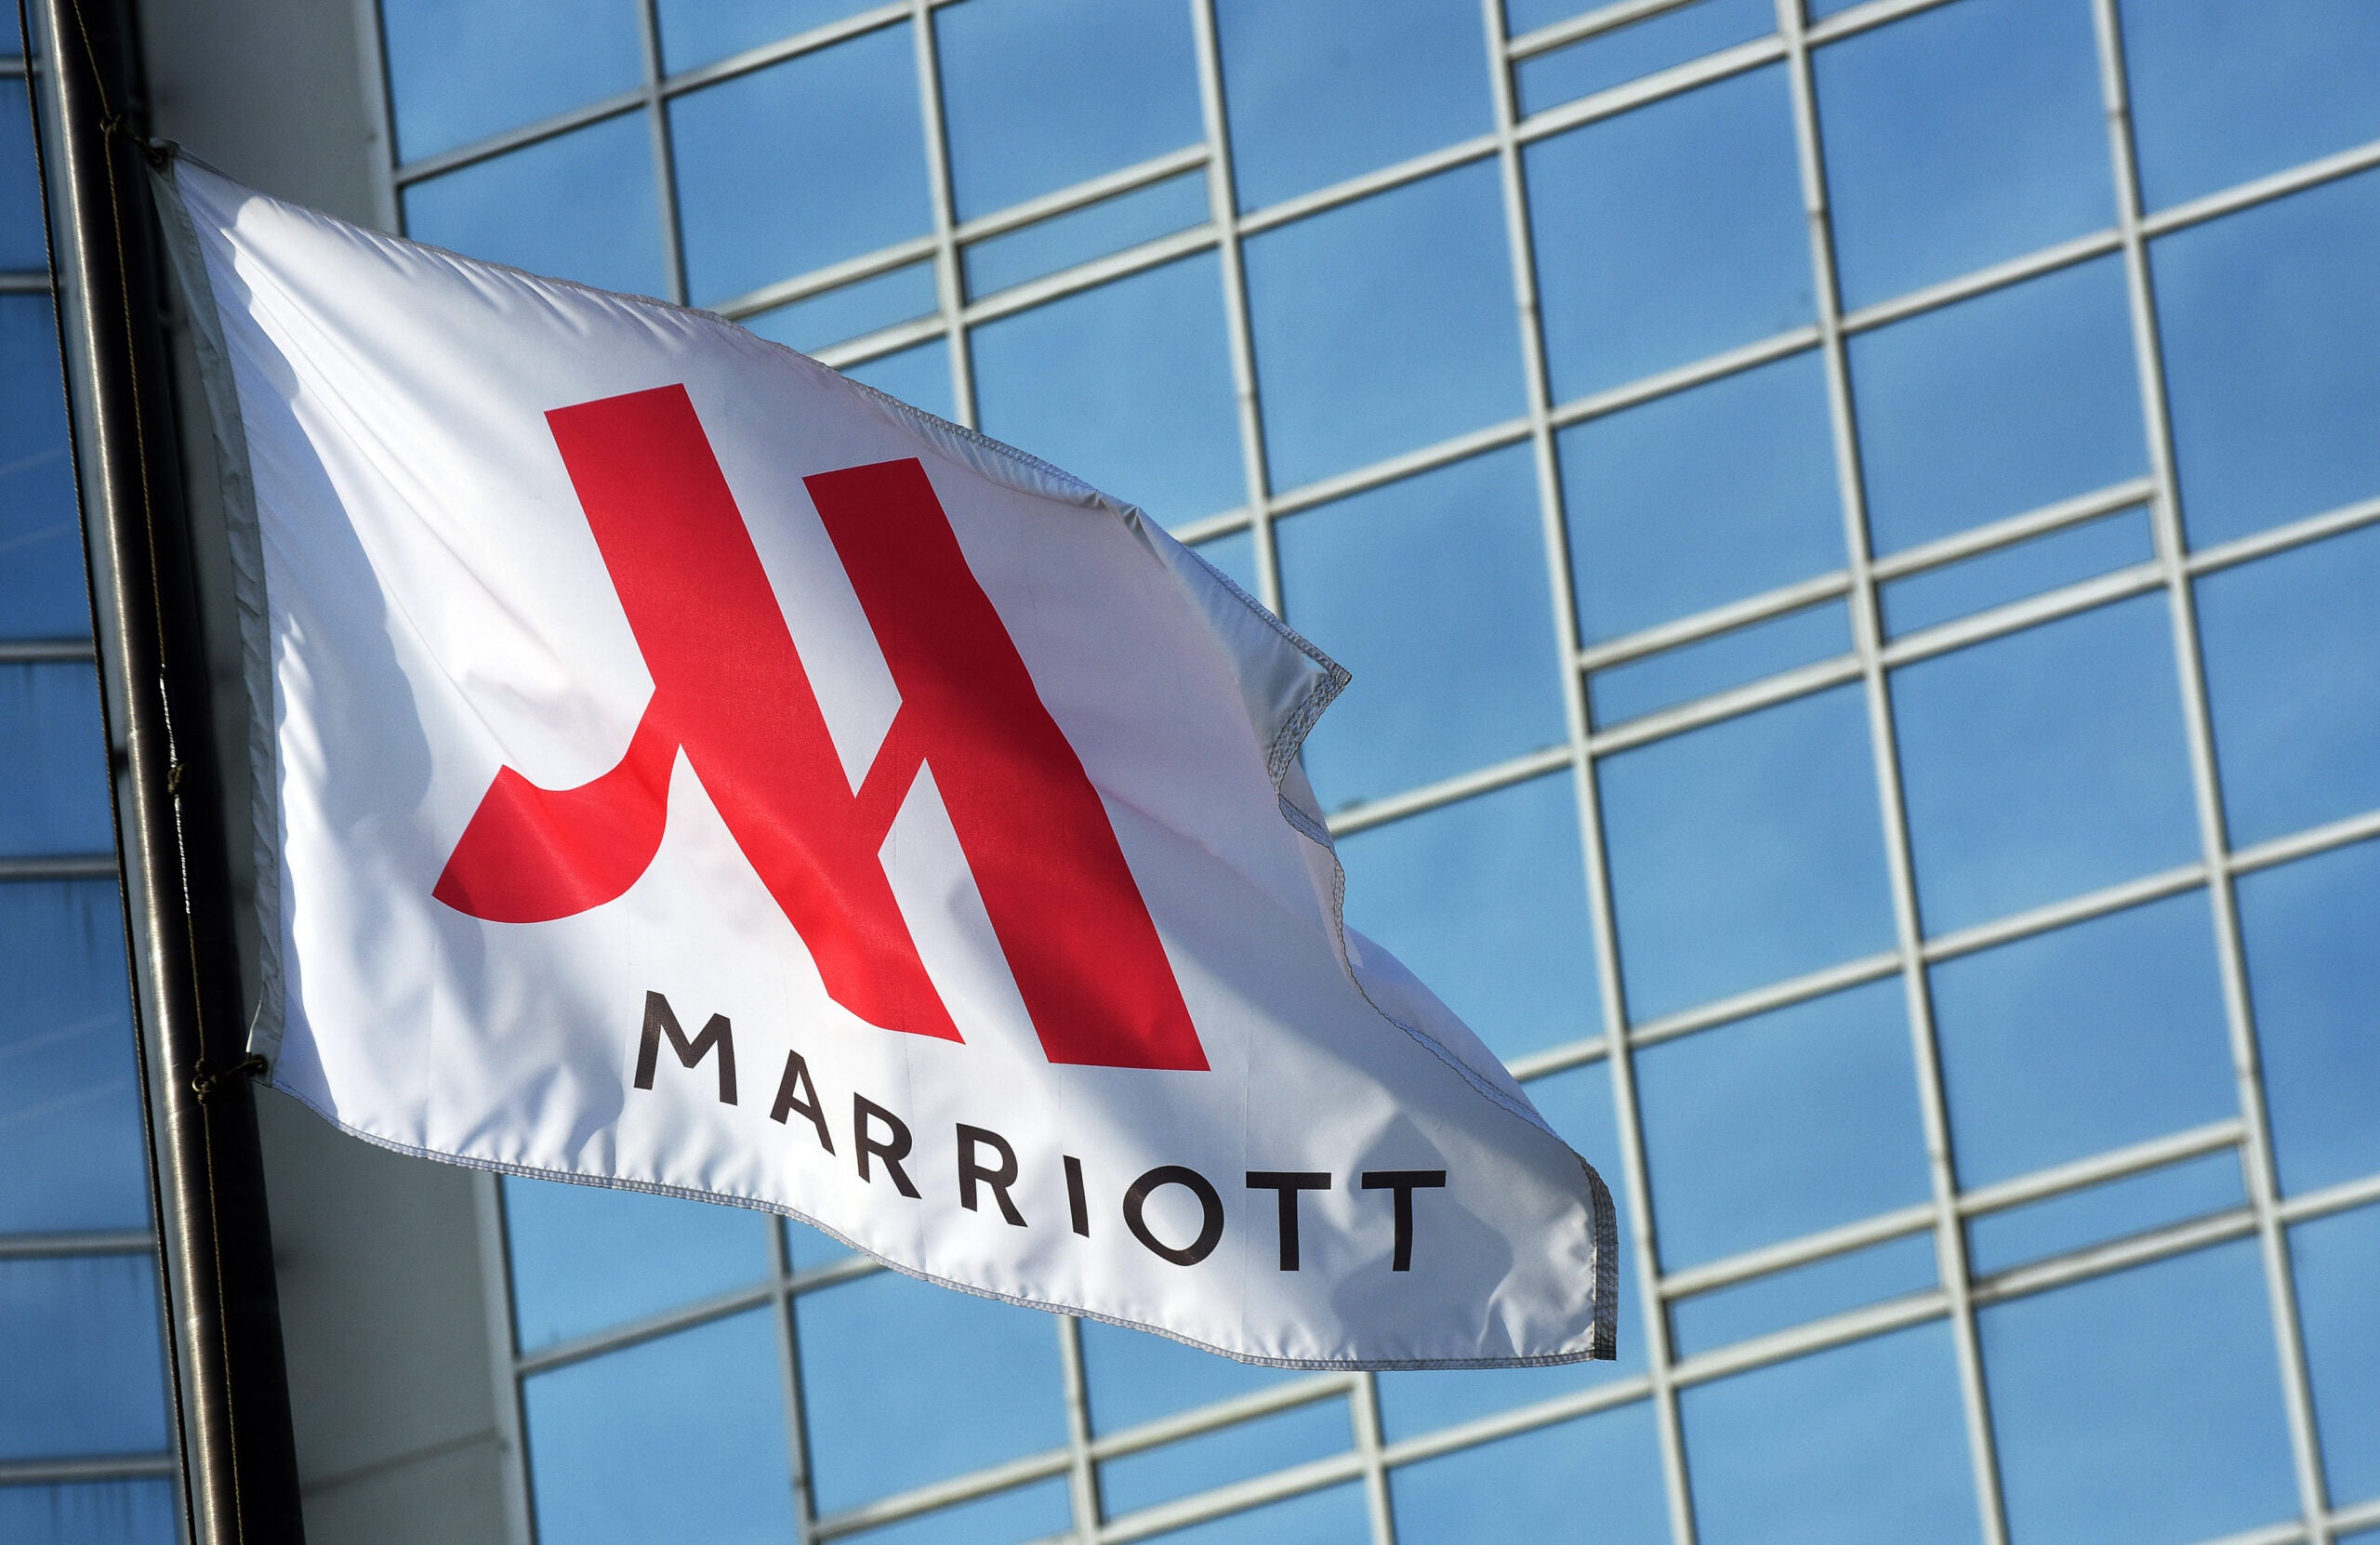 Link your Marriott and Uber accounts to earn 3,000 Marriott Bonvoy points